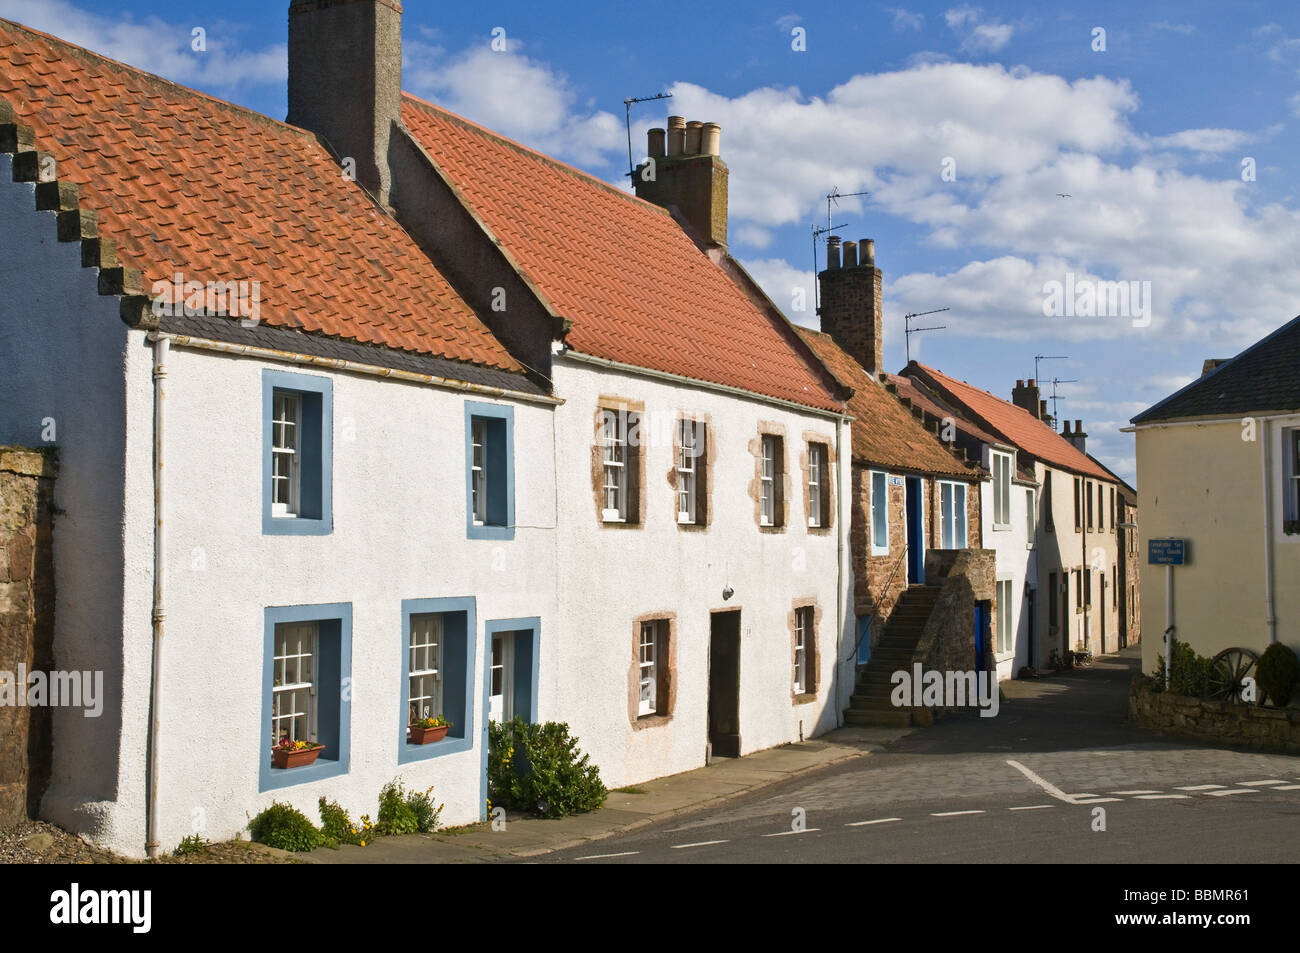 dh Traditional village CRAIL FIFE Scottish House rural villages of Houses scotland north east neuk Stock Photo